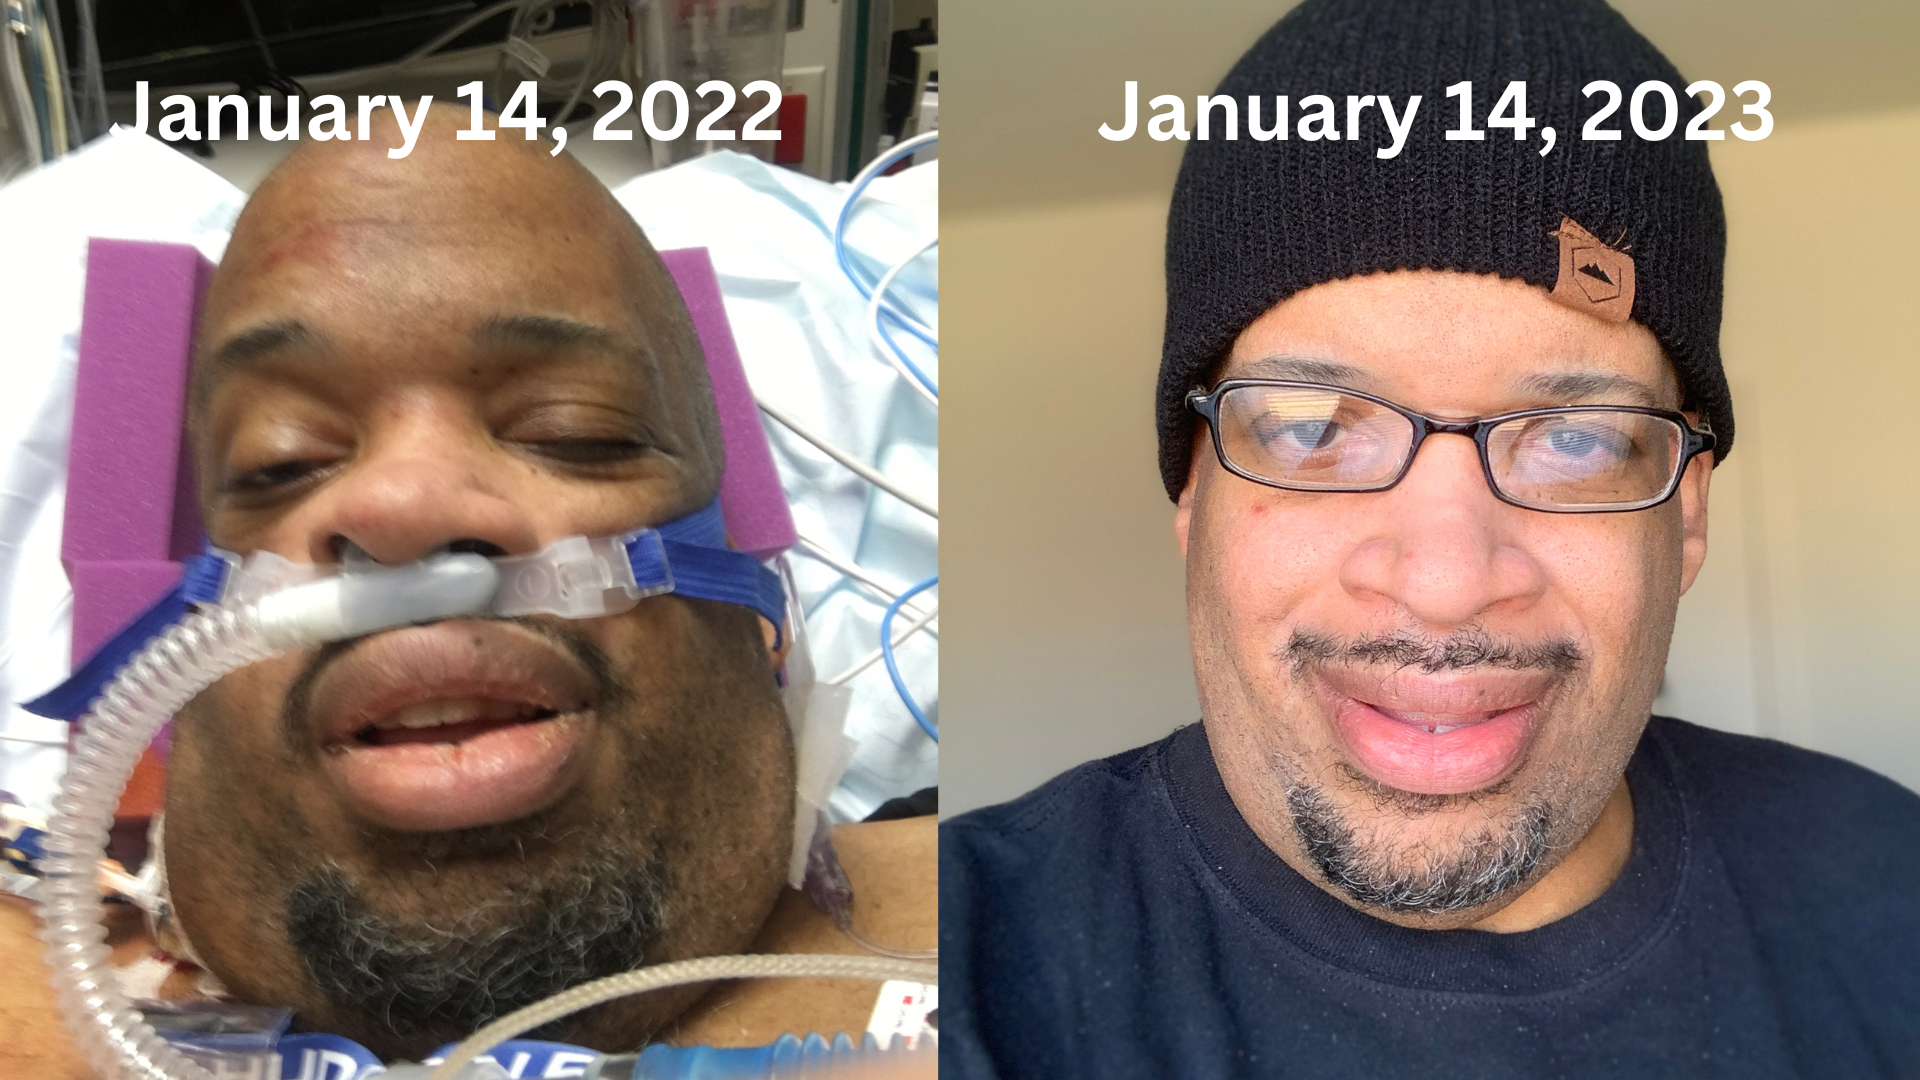 Michael Walker in a hospital bed on January 14, 2022 and healthy on January 22, 2023